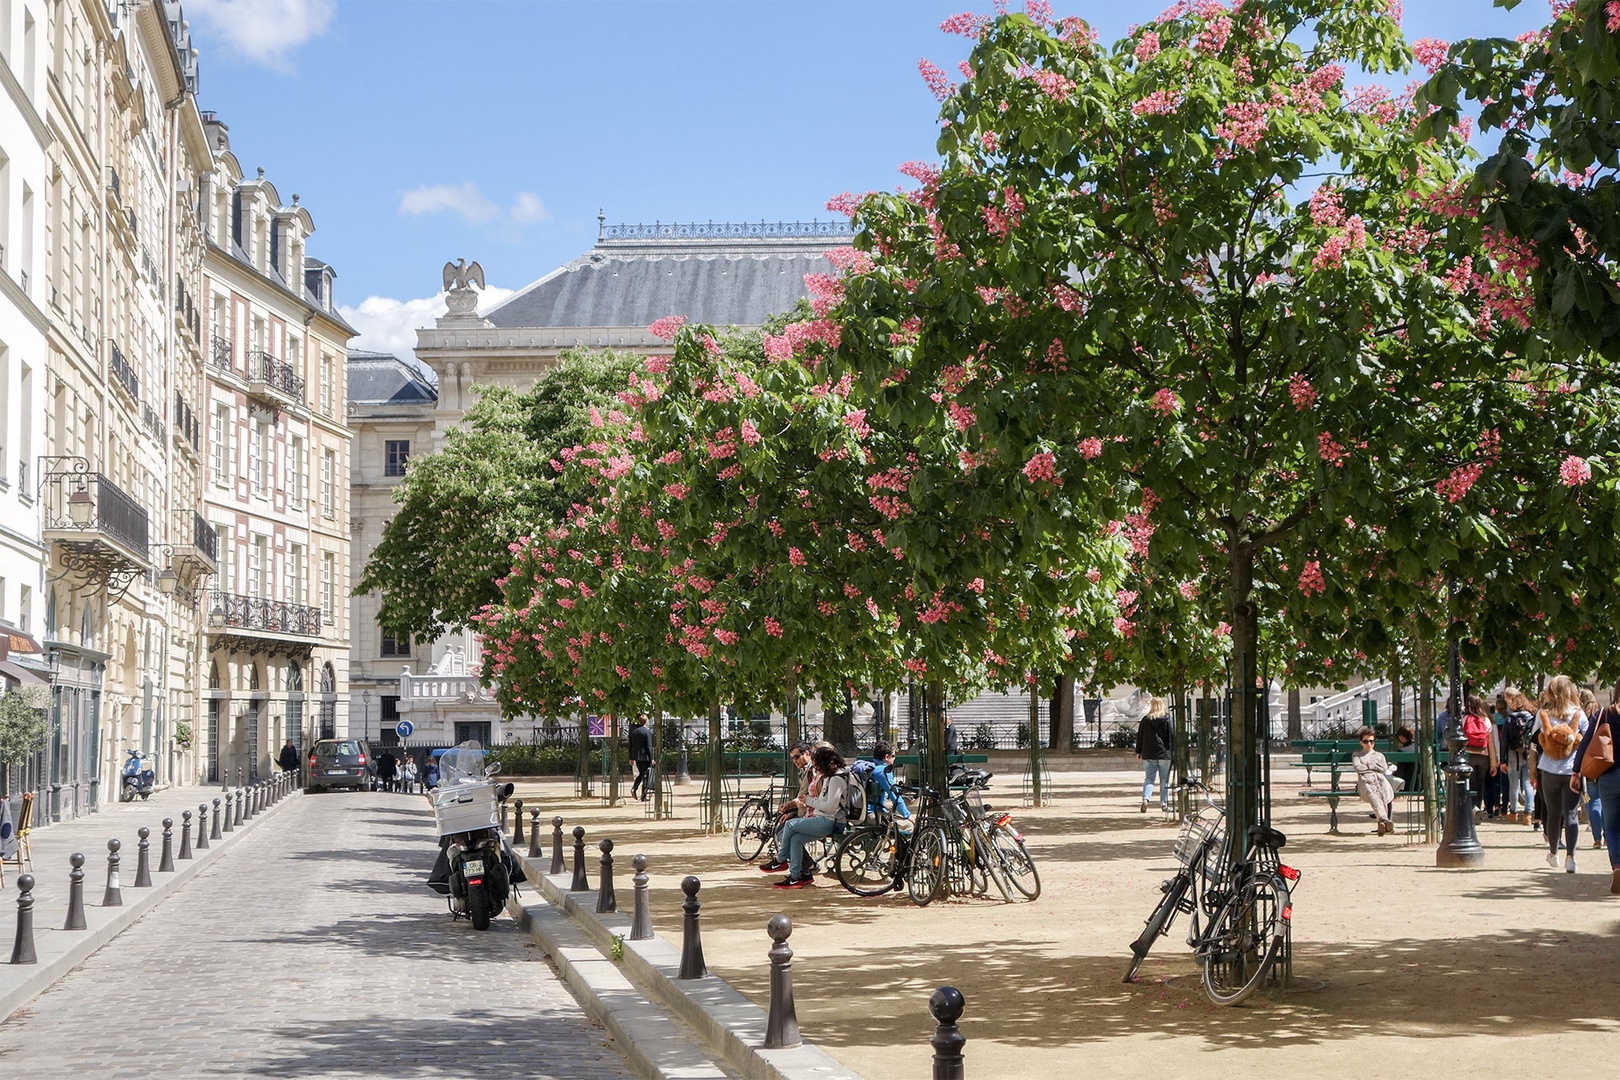 Place Dauphine is one of the most romantic spots in Paris!